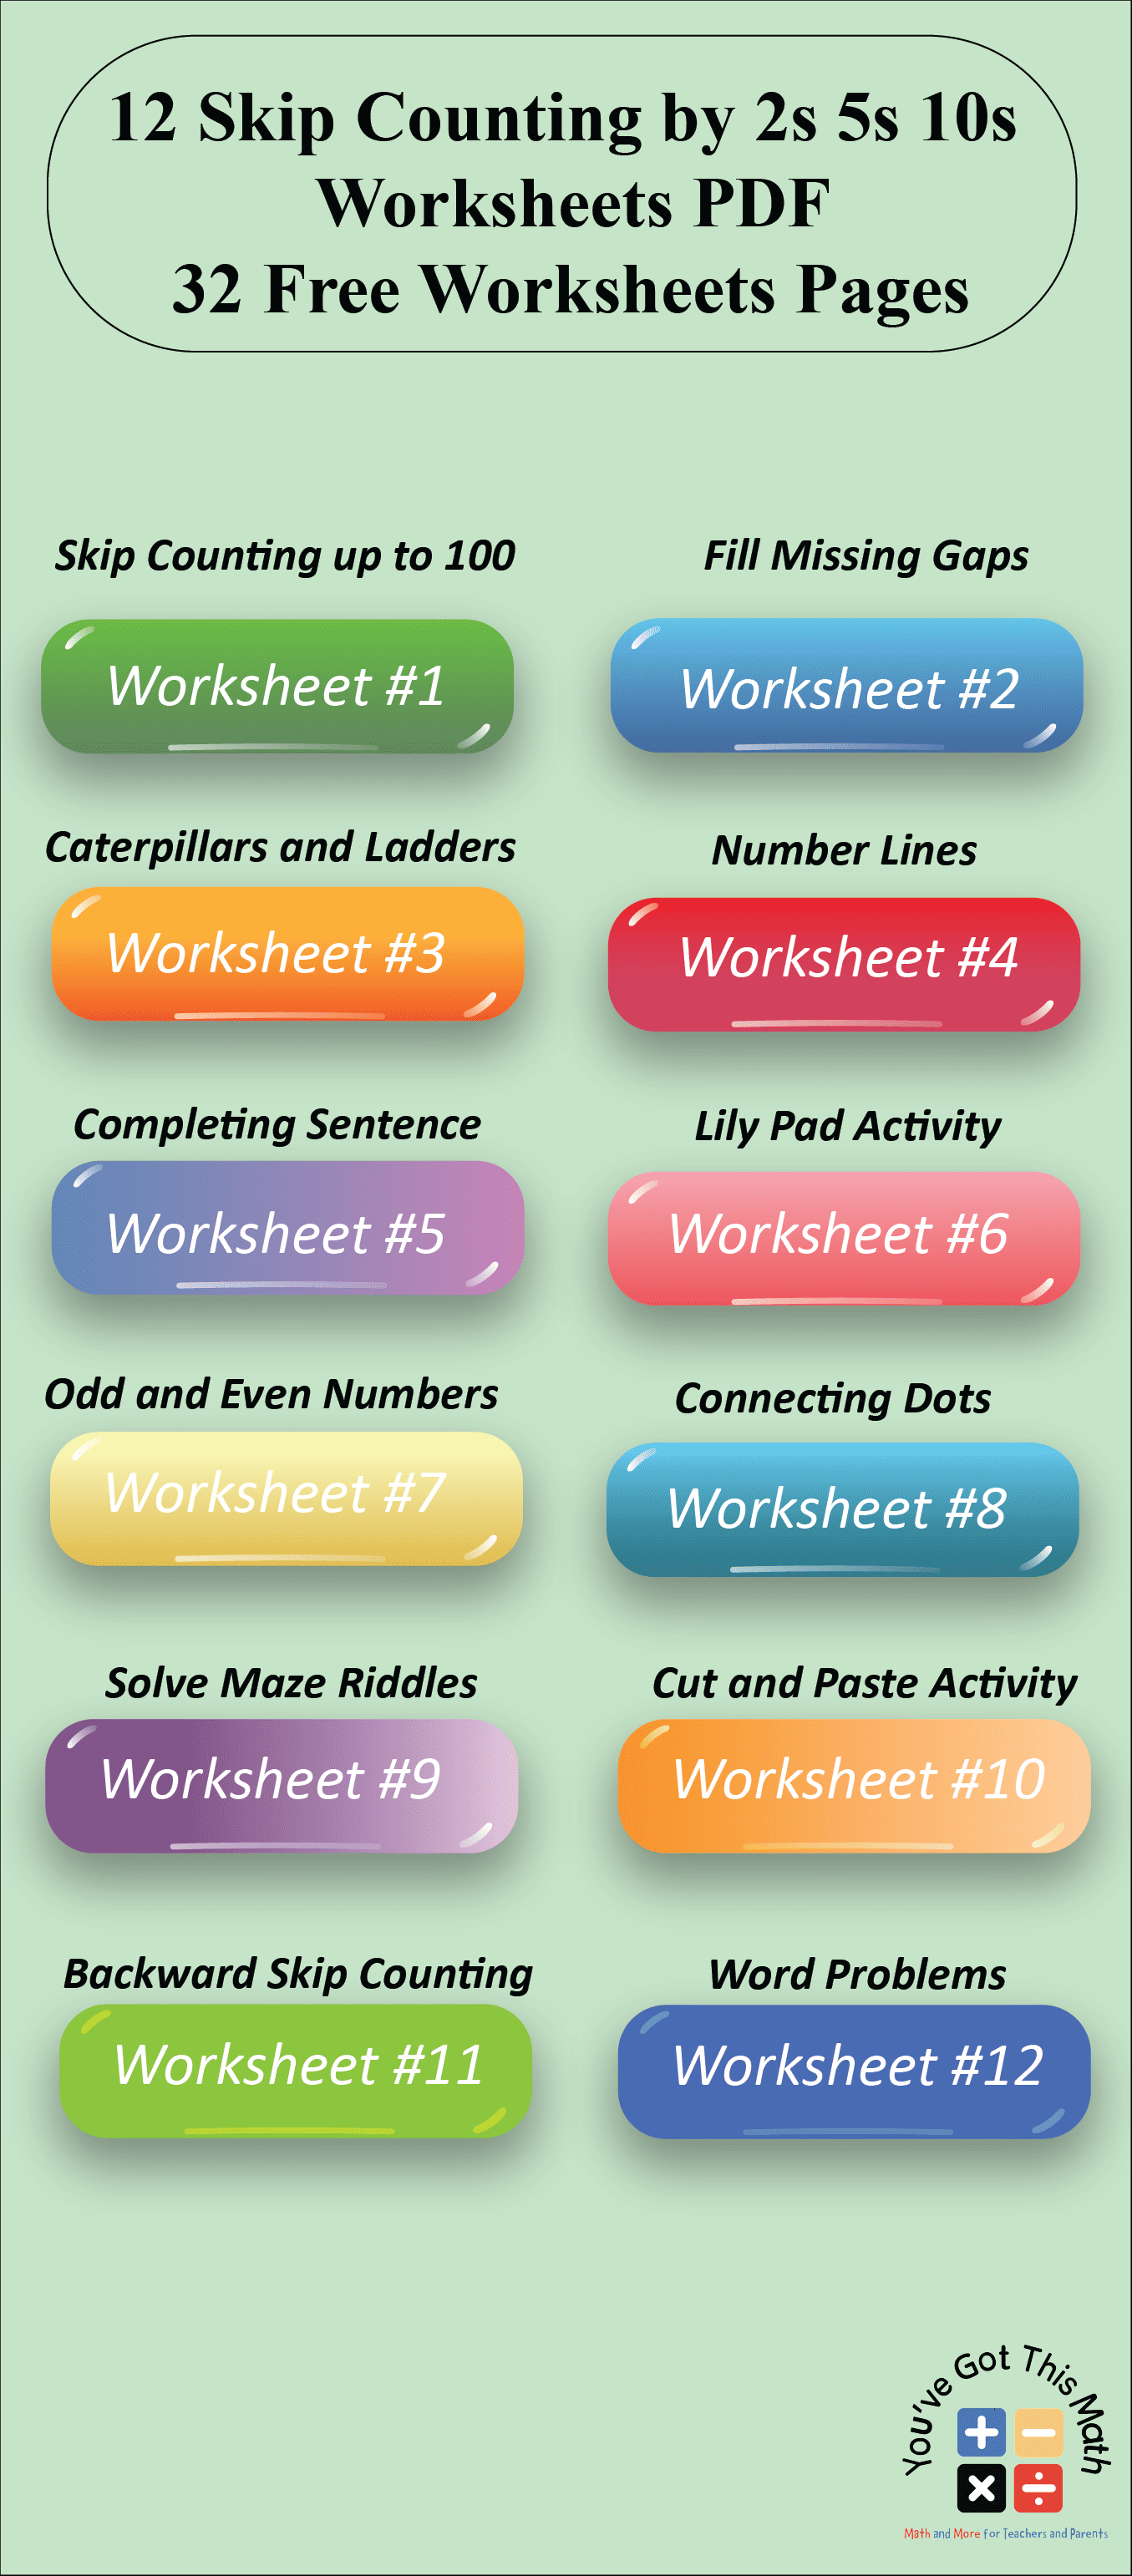 Skip Counting by 2s 5s 10s Worksheets PDF box image-01